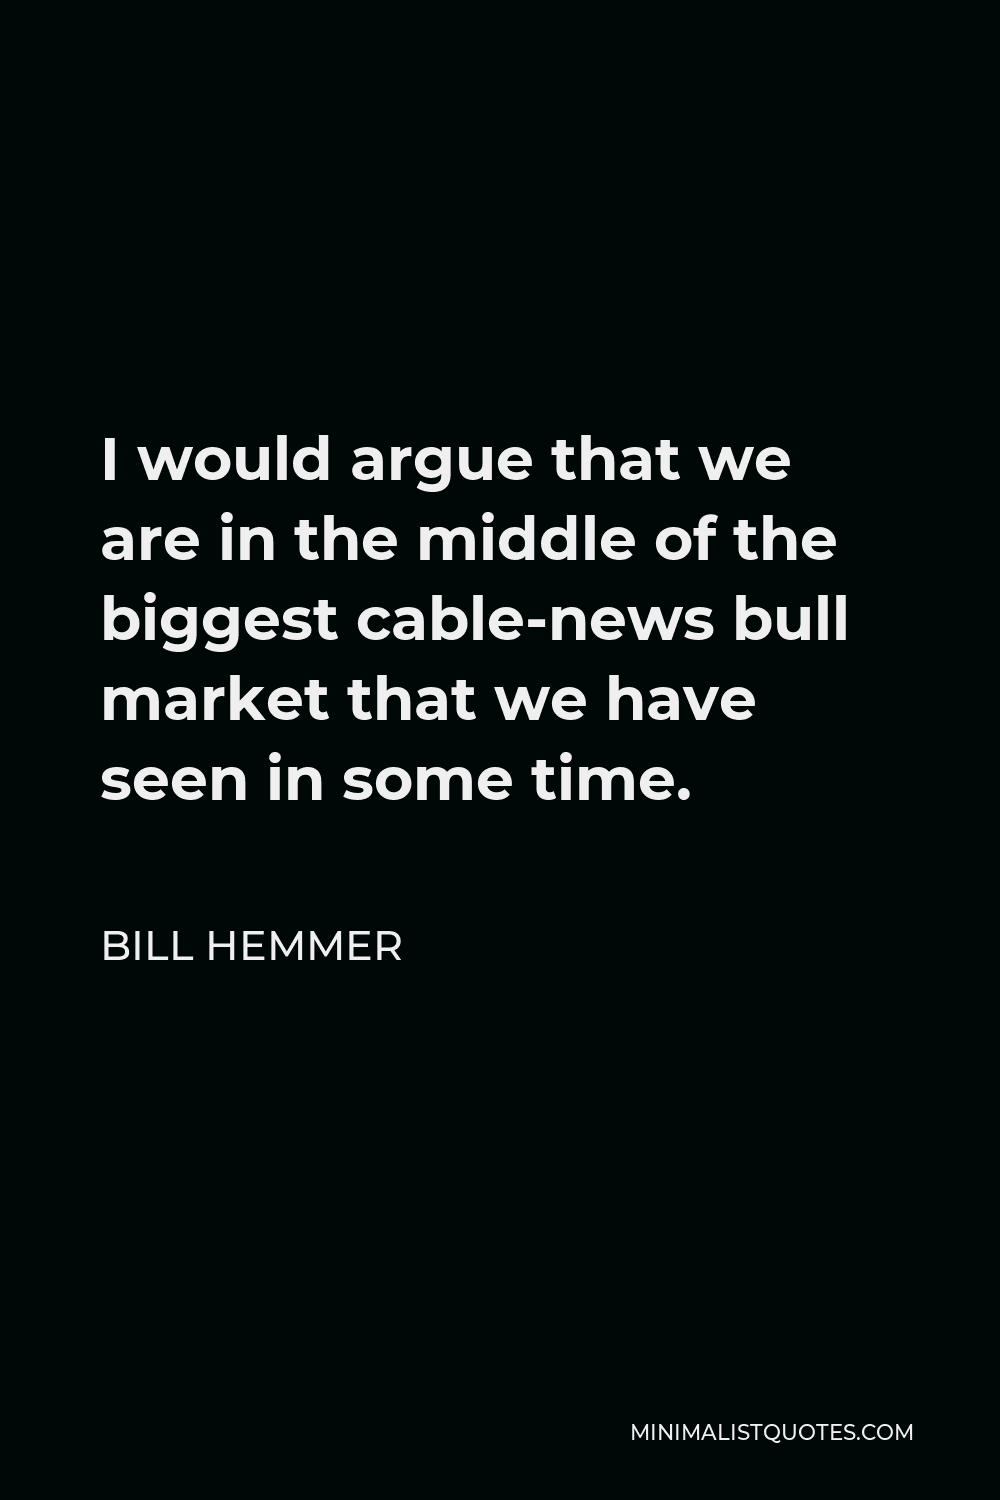 Bill Hemmer Quote - I would argue that we are in the middle of the biggest cable-news bull market that we have seen in some time.